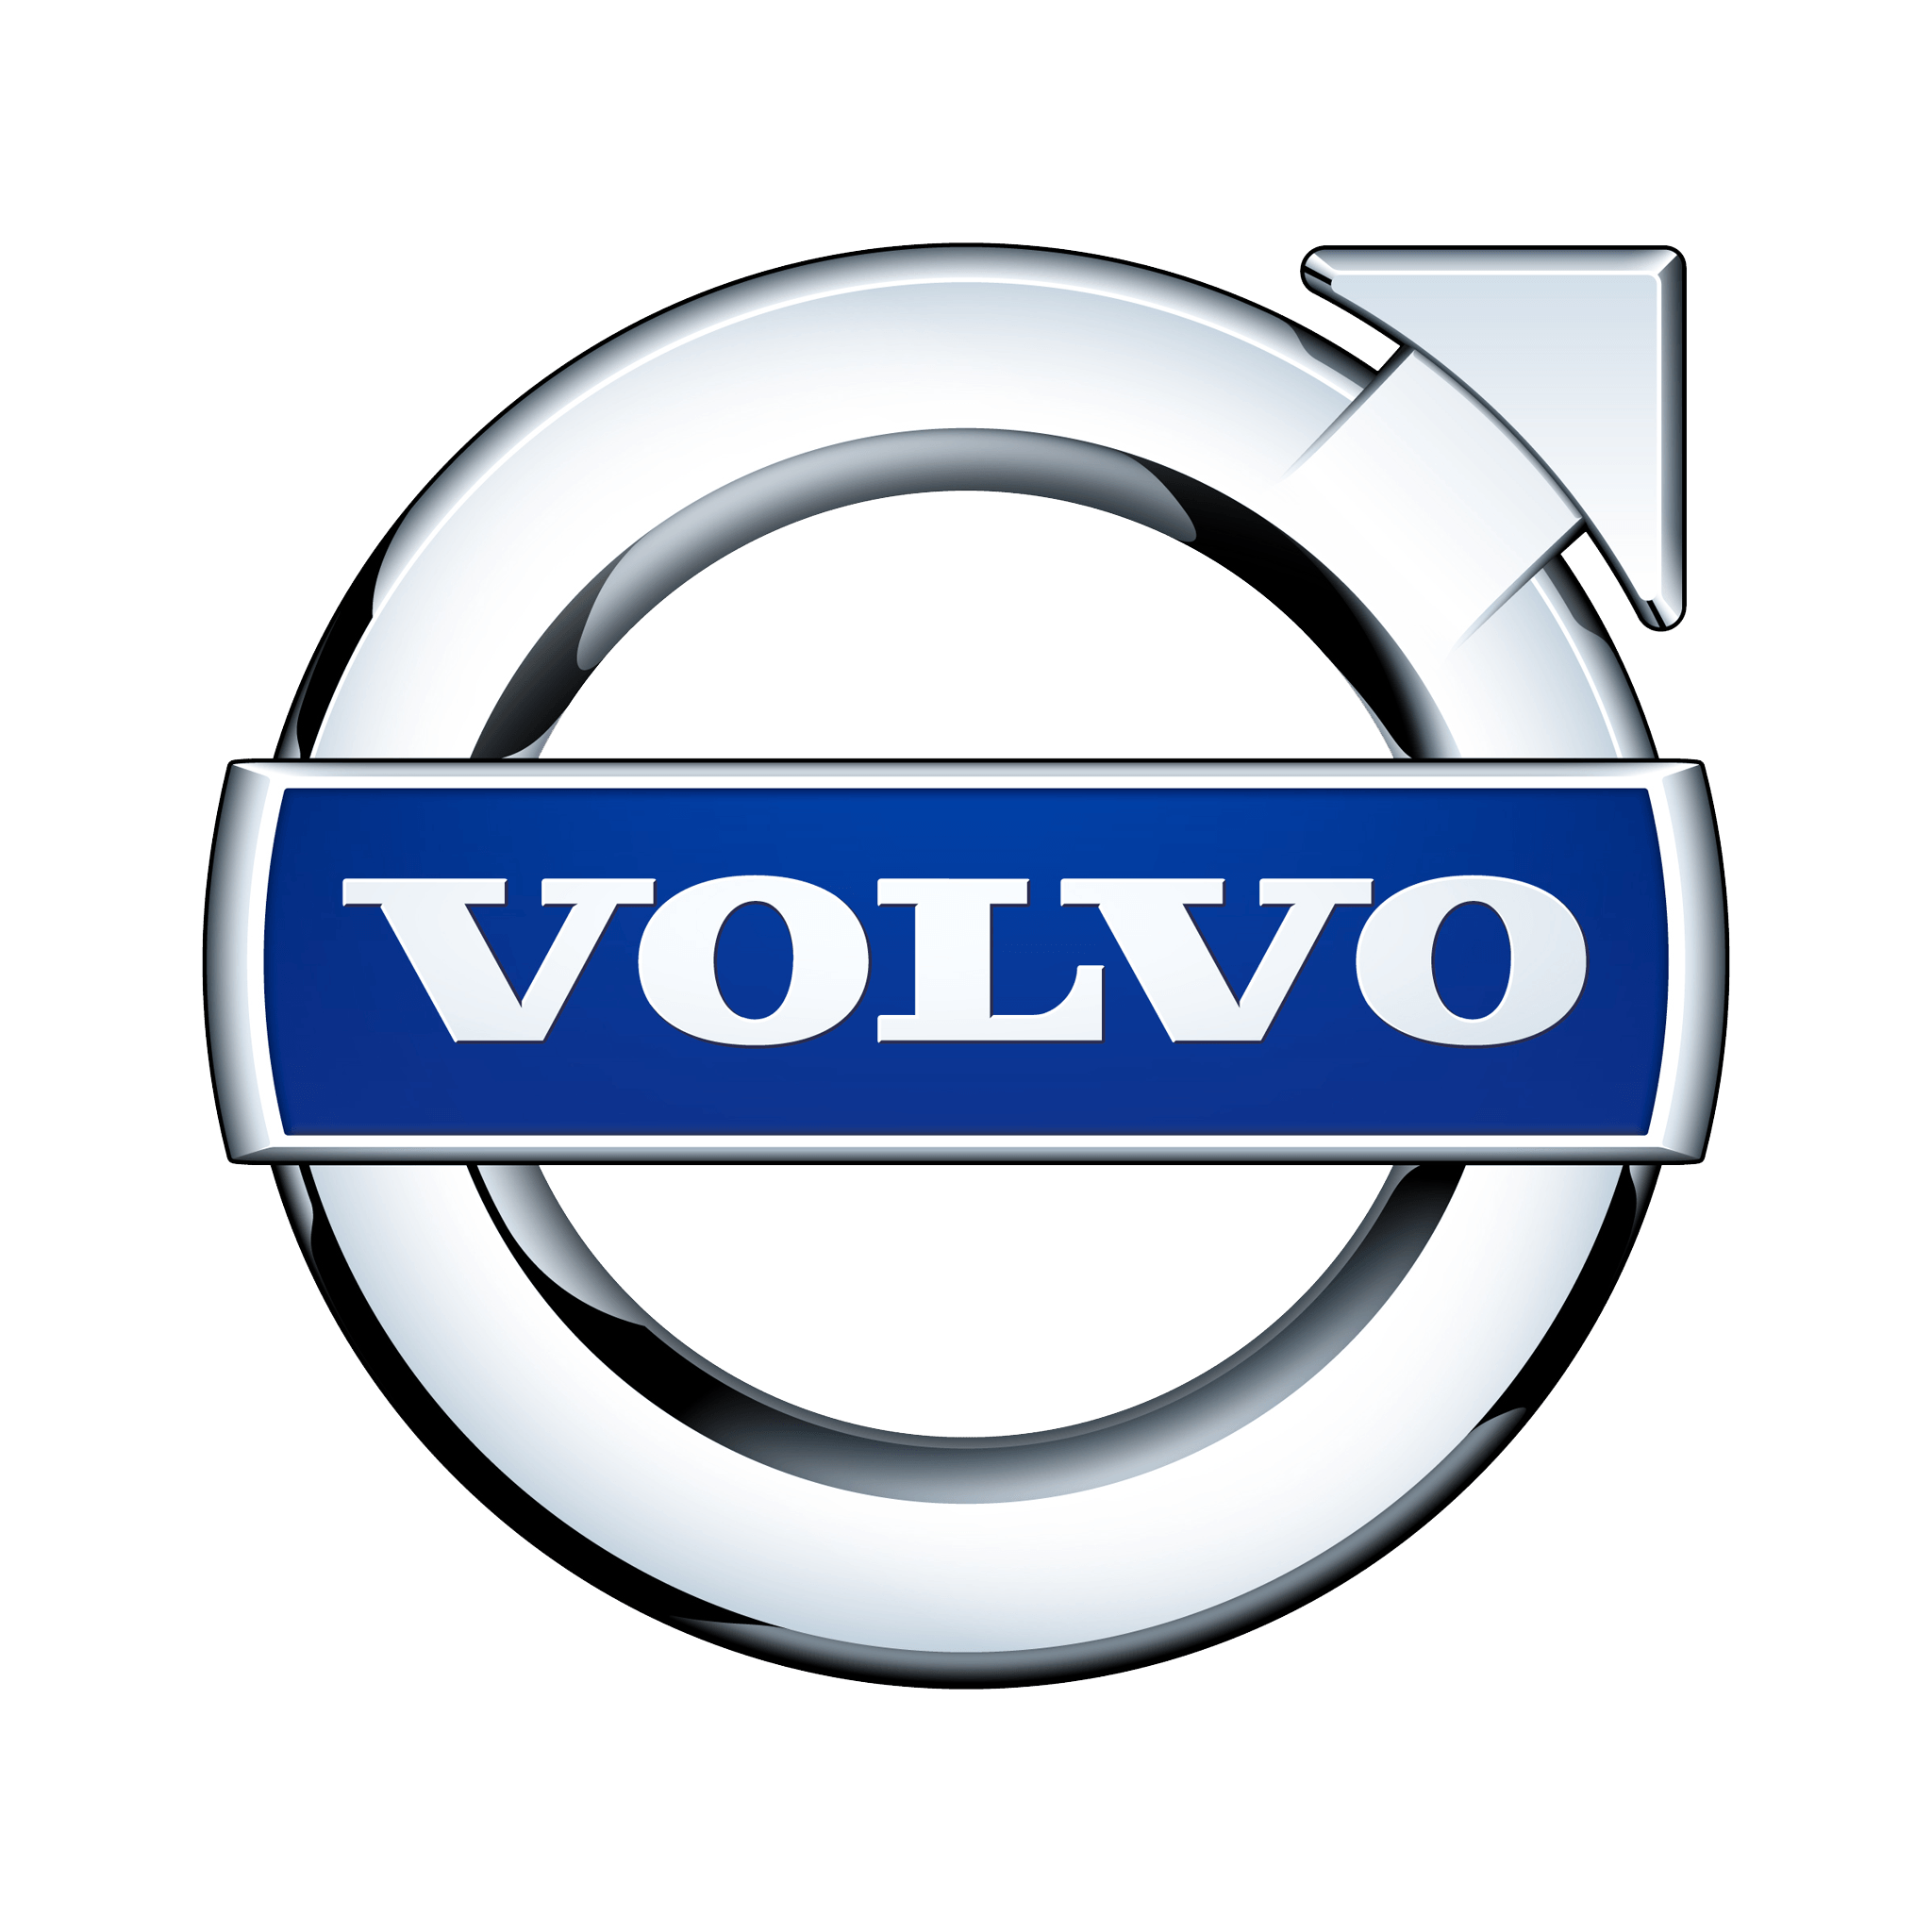 Famous Car Brand Logo - Logo of Famous Car Brands & Their Meanings